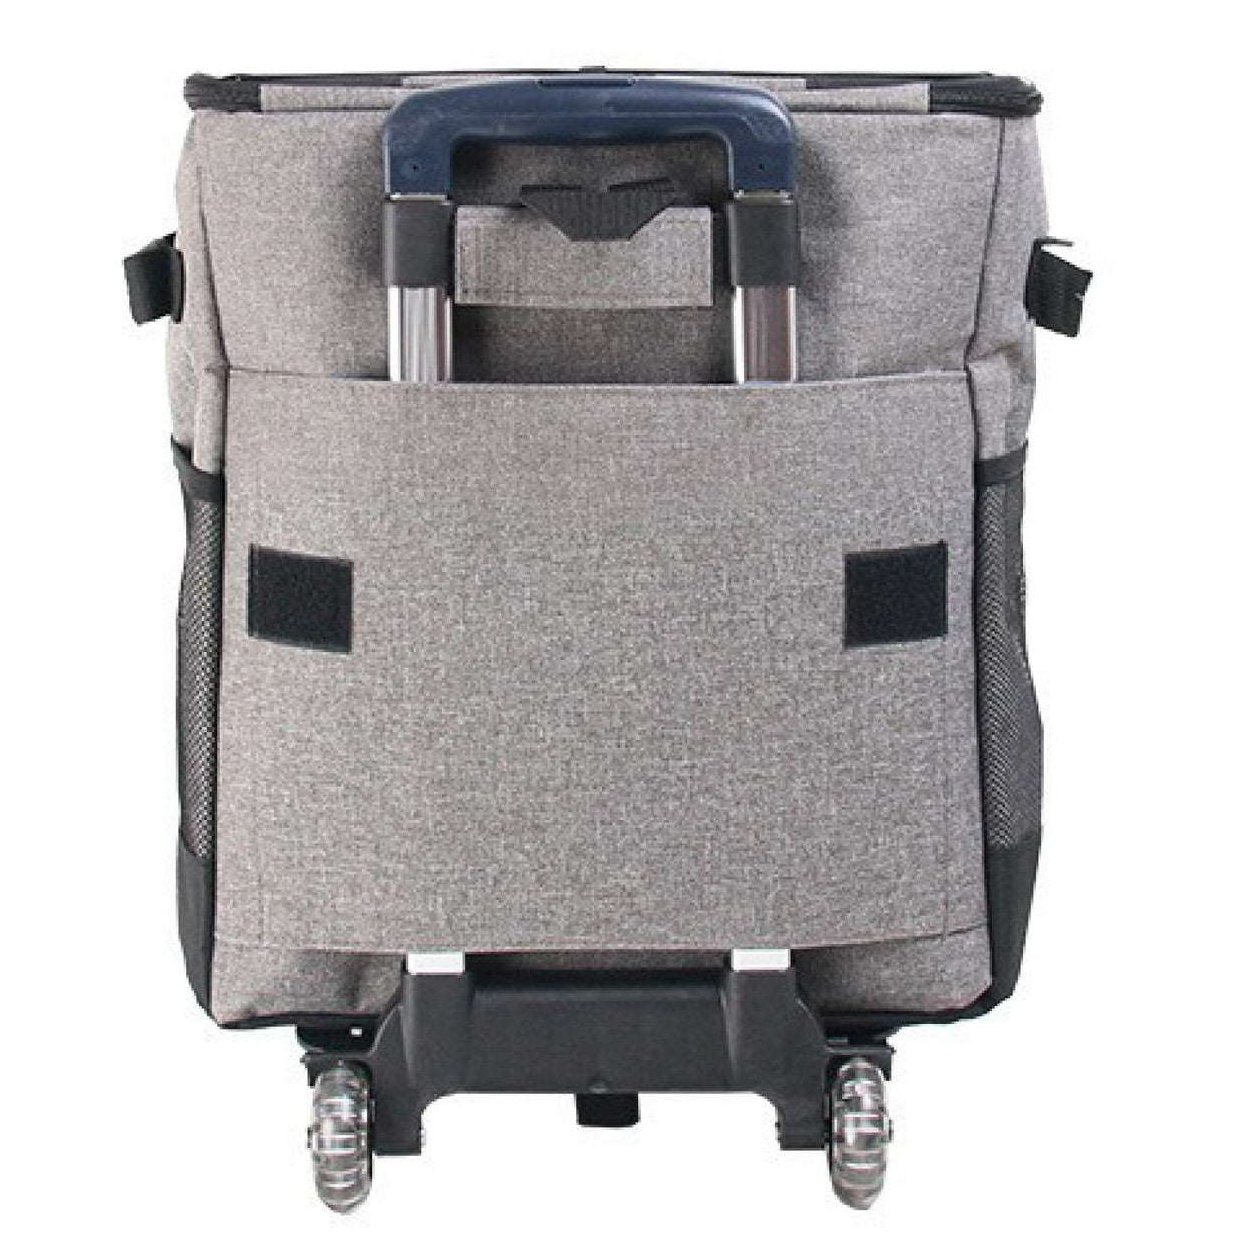 Cooler Bag Trolley Thermally Insulated Backpack 36L